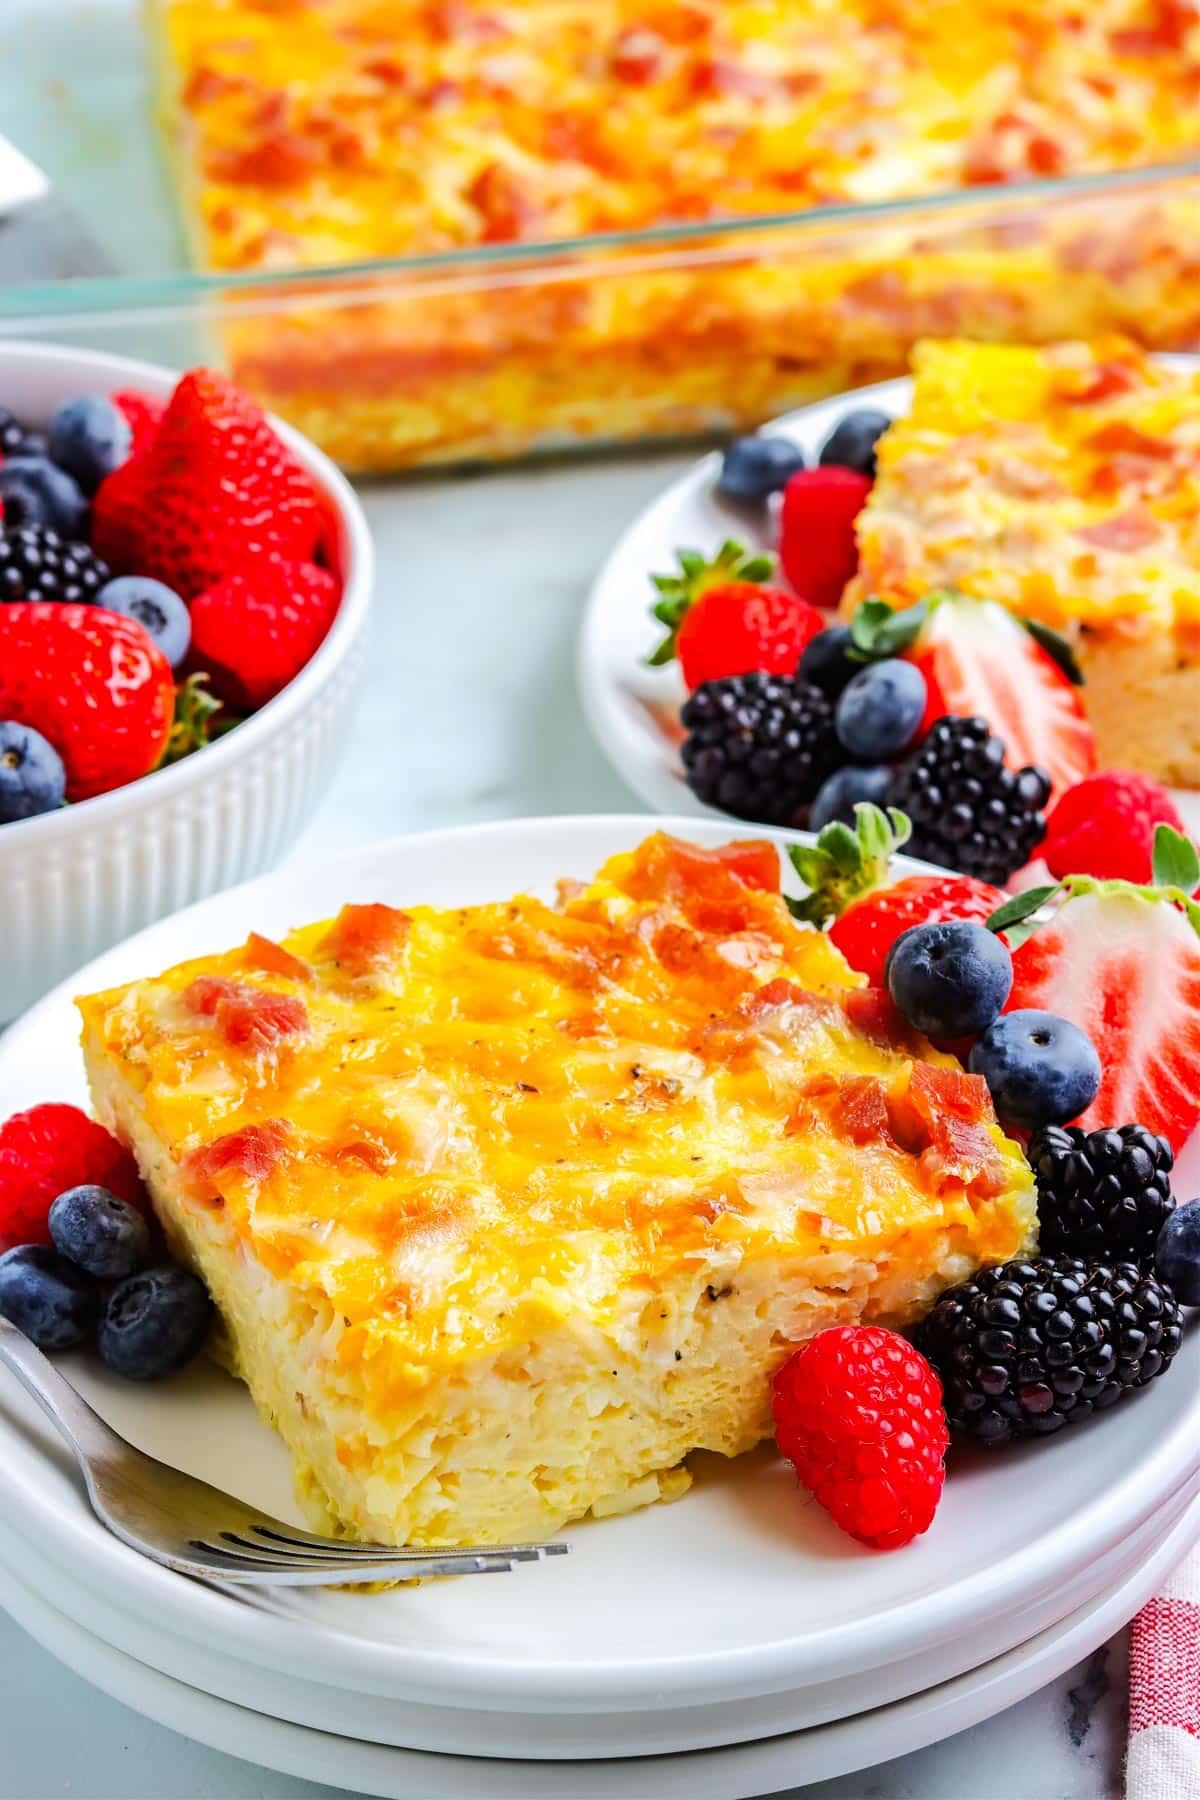 A slice of Ham Breakfast Casserole on a white plate with some berries.